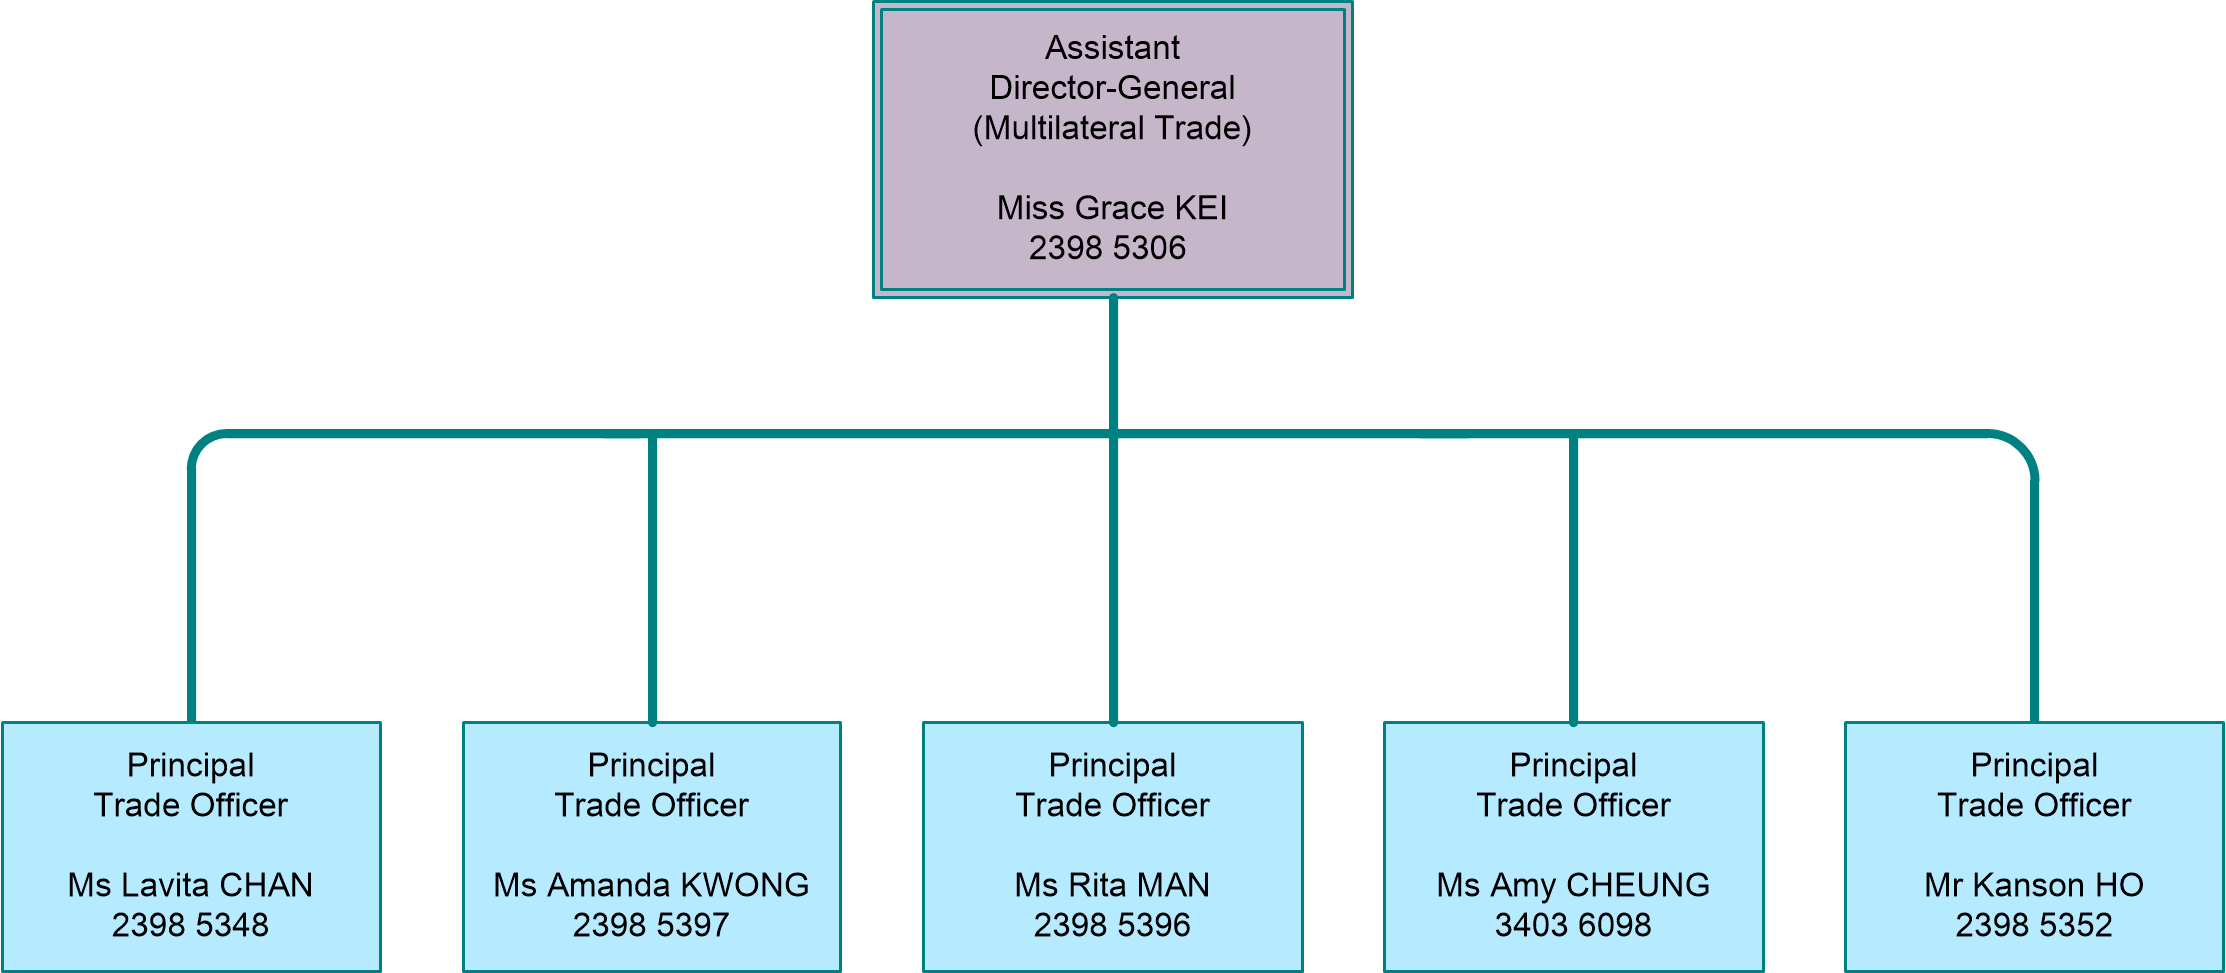 Multilateral Trade Division Organisation Chart (Please refer to below contents for description)